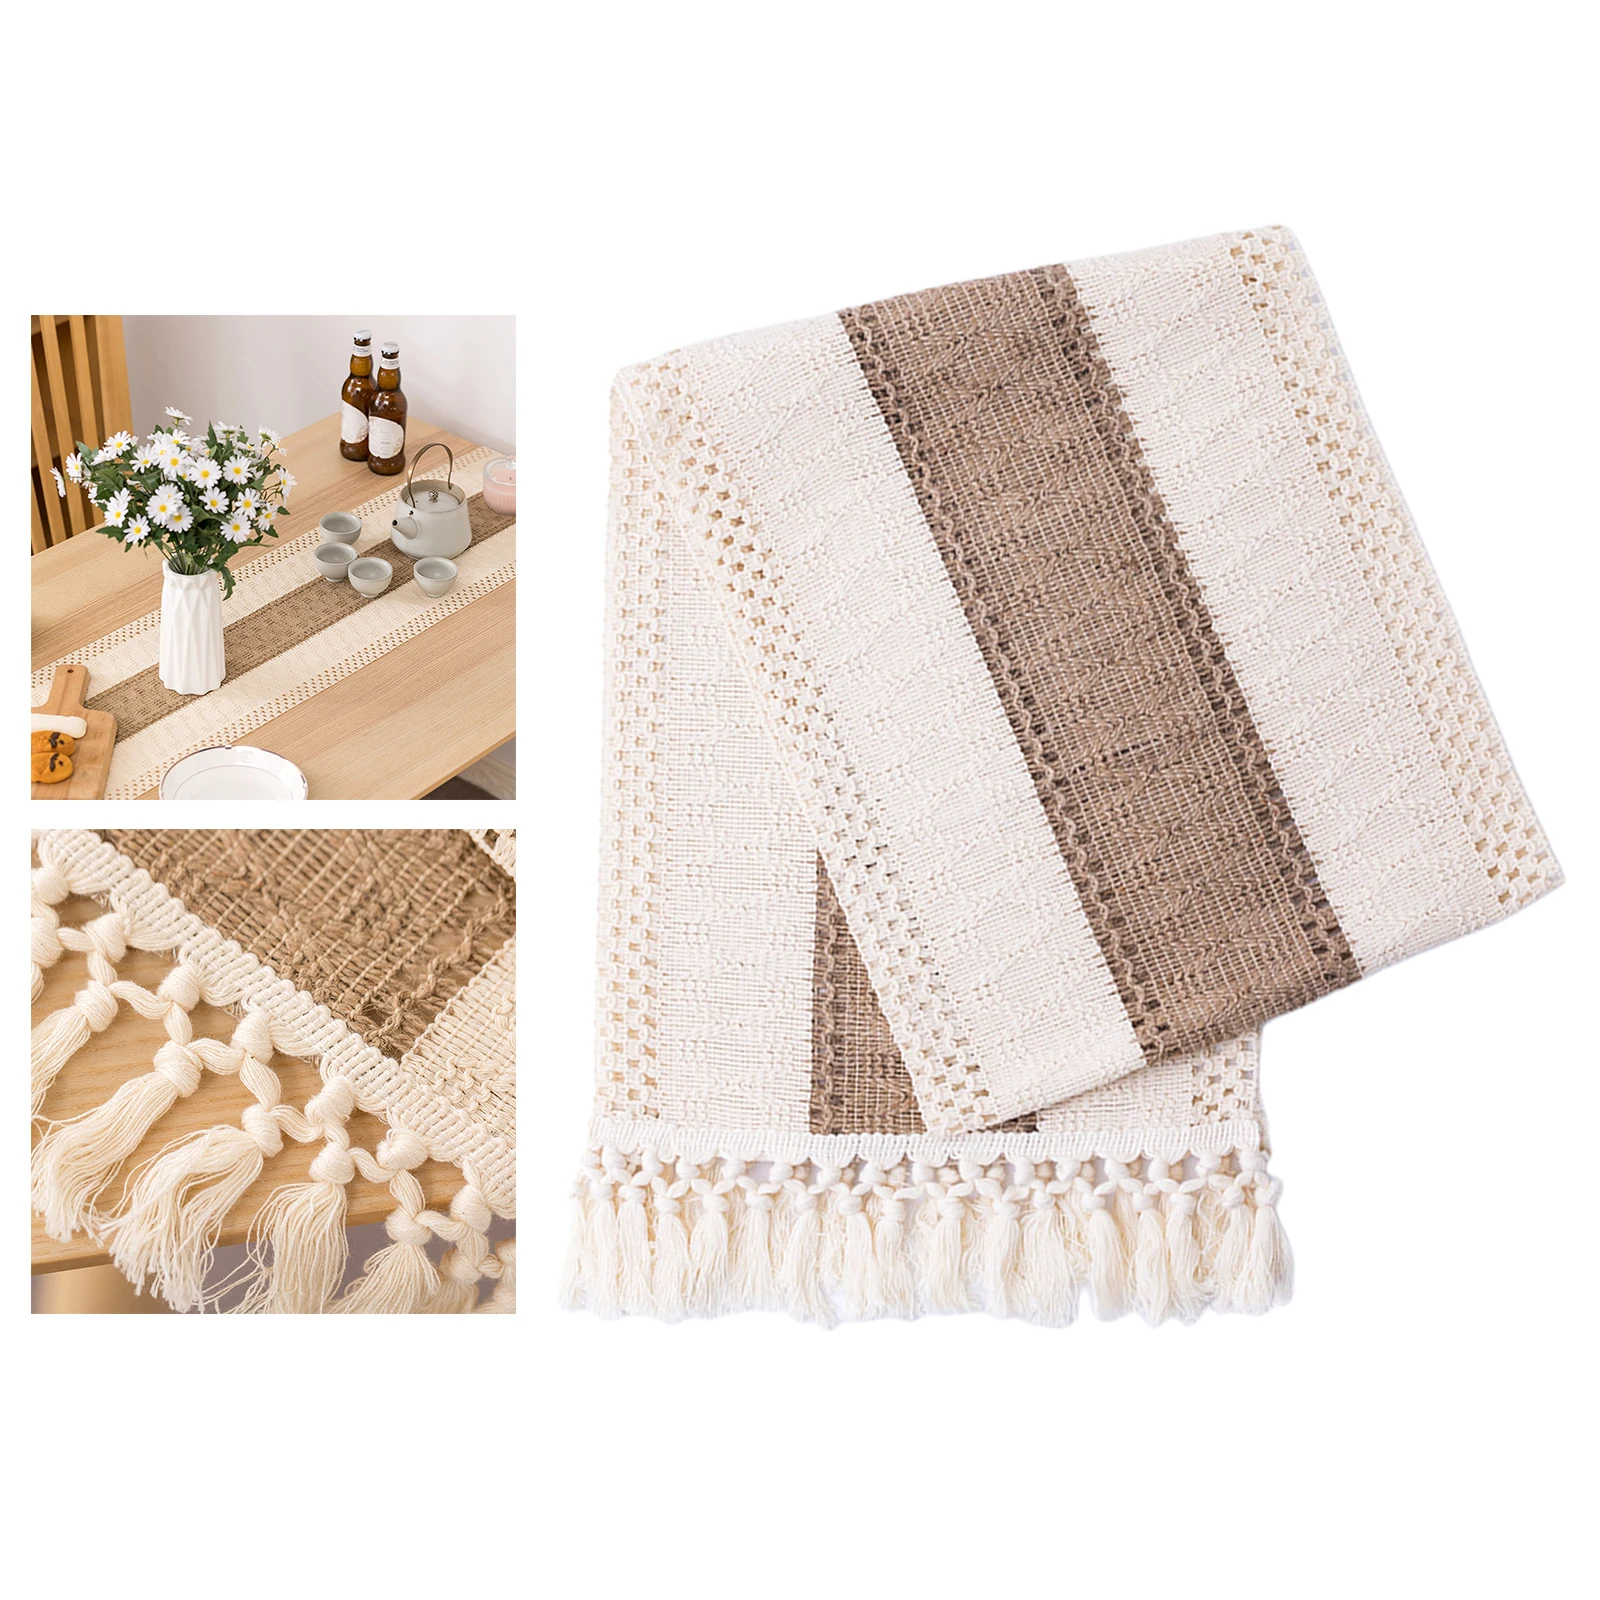 

Burlap Macrame Table Runner Farmhouse Style Hollow Tassels Woven Table Runners Decorative Country Wedding Party Decoration